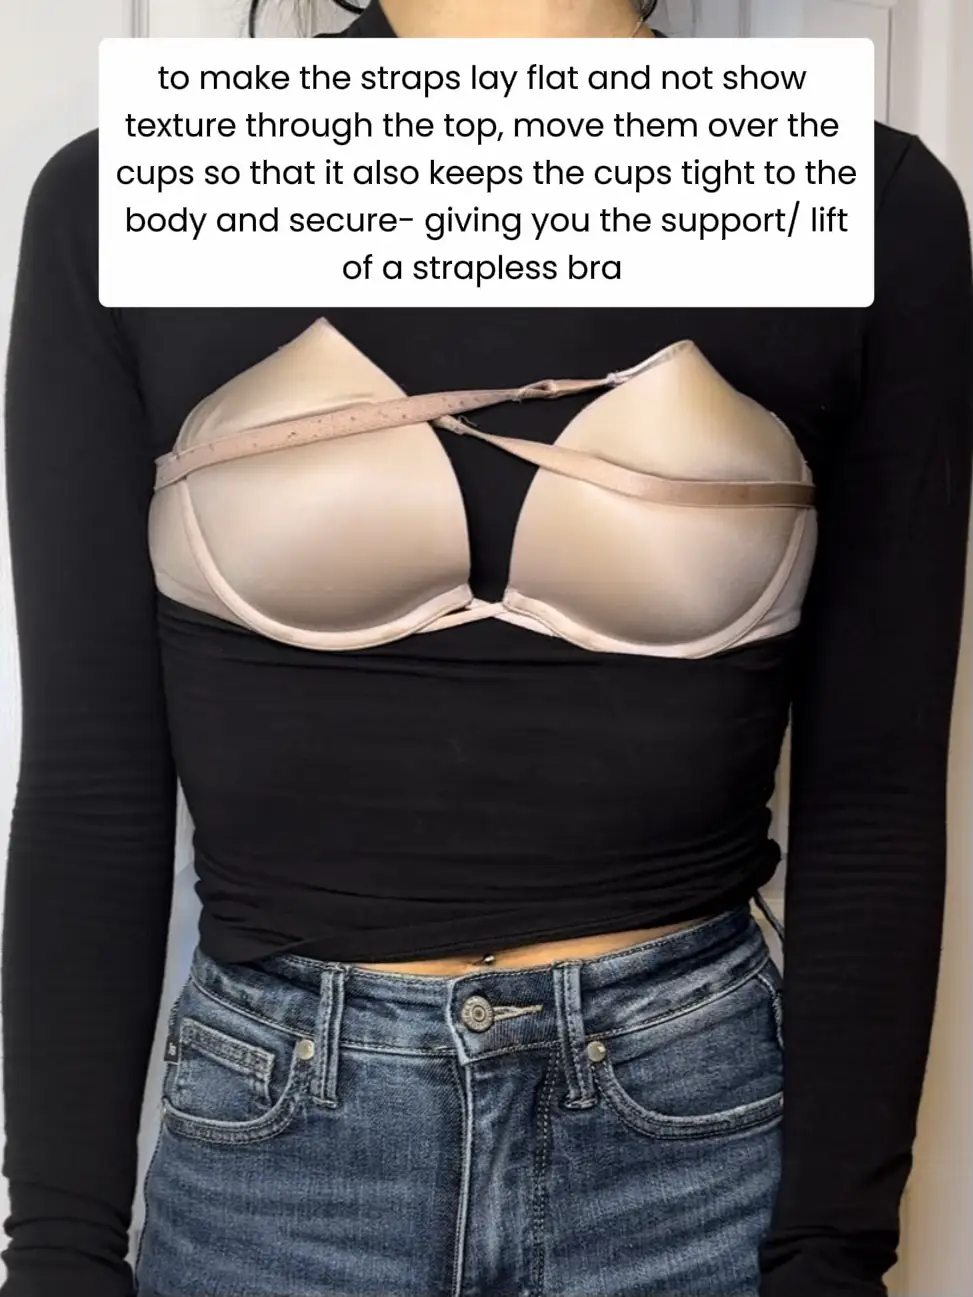 I was bullied for having 32A boobs – now I've made millions from